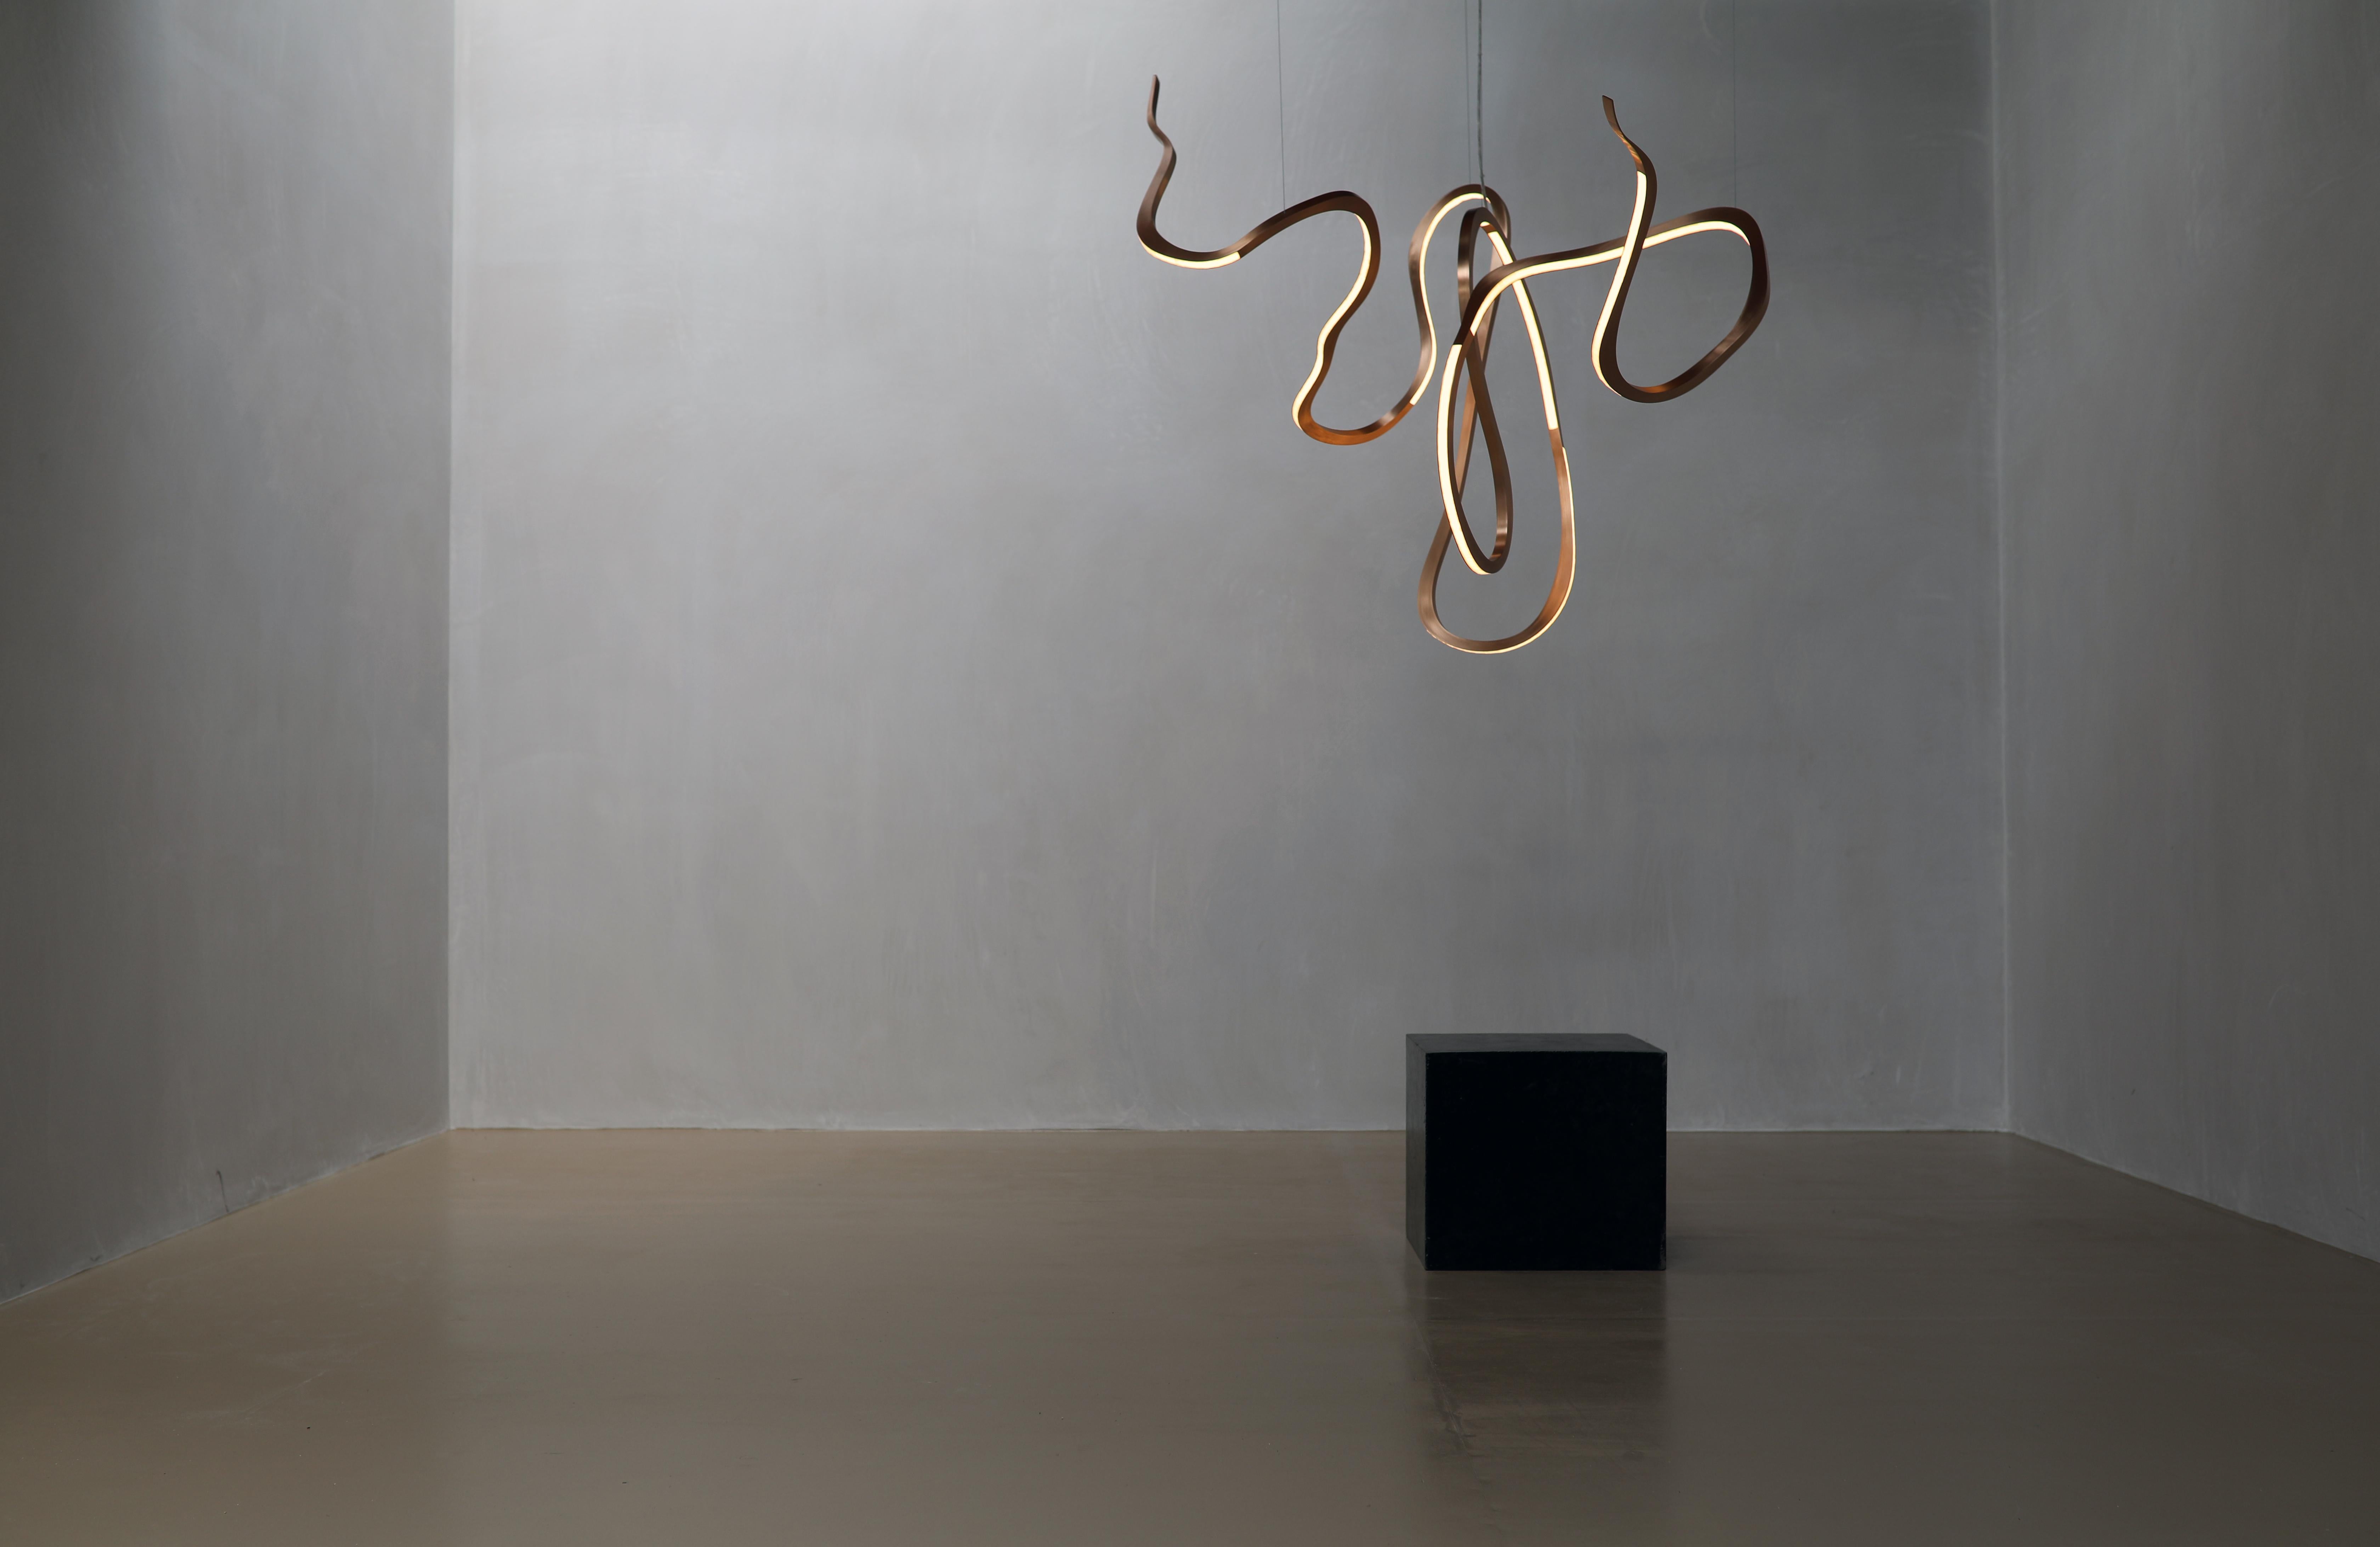 As with her previous iterations of Artist's Hand, Niamh Barry once more shows her mastery in conveying beautiful forms of movement with polished bronze and LED. In this case the Irish artist, employing elements relatively new to her work (like a